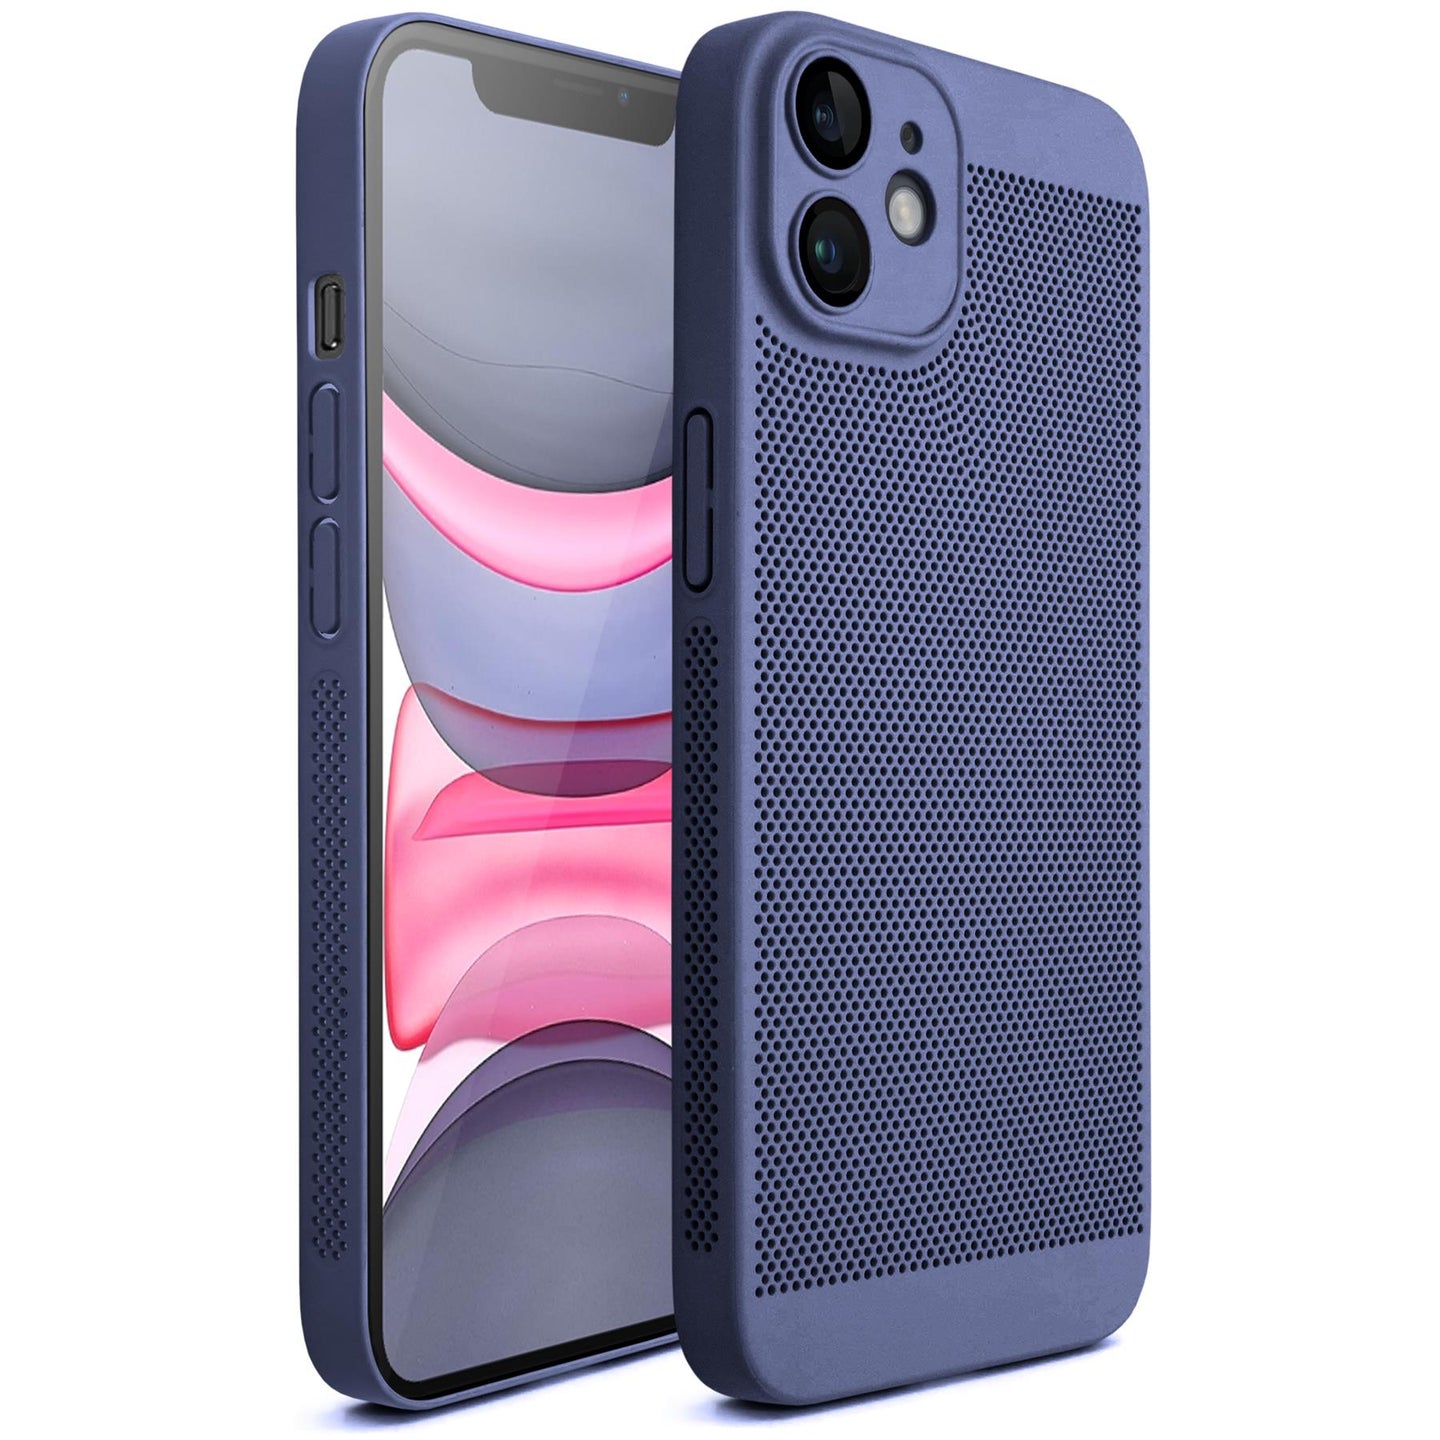 Moozy VentiGuard Phone Case for iPhone 11, Blue, 6.1-inch - Breathable Cover with Perforated Pattern for Air Circulation, Ventilation, Anti-Overheating Phone Case